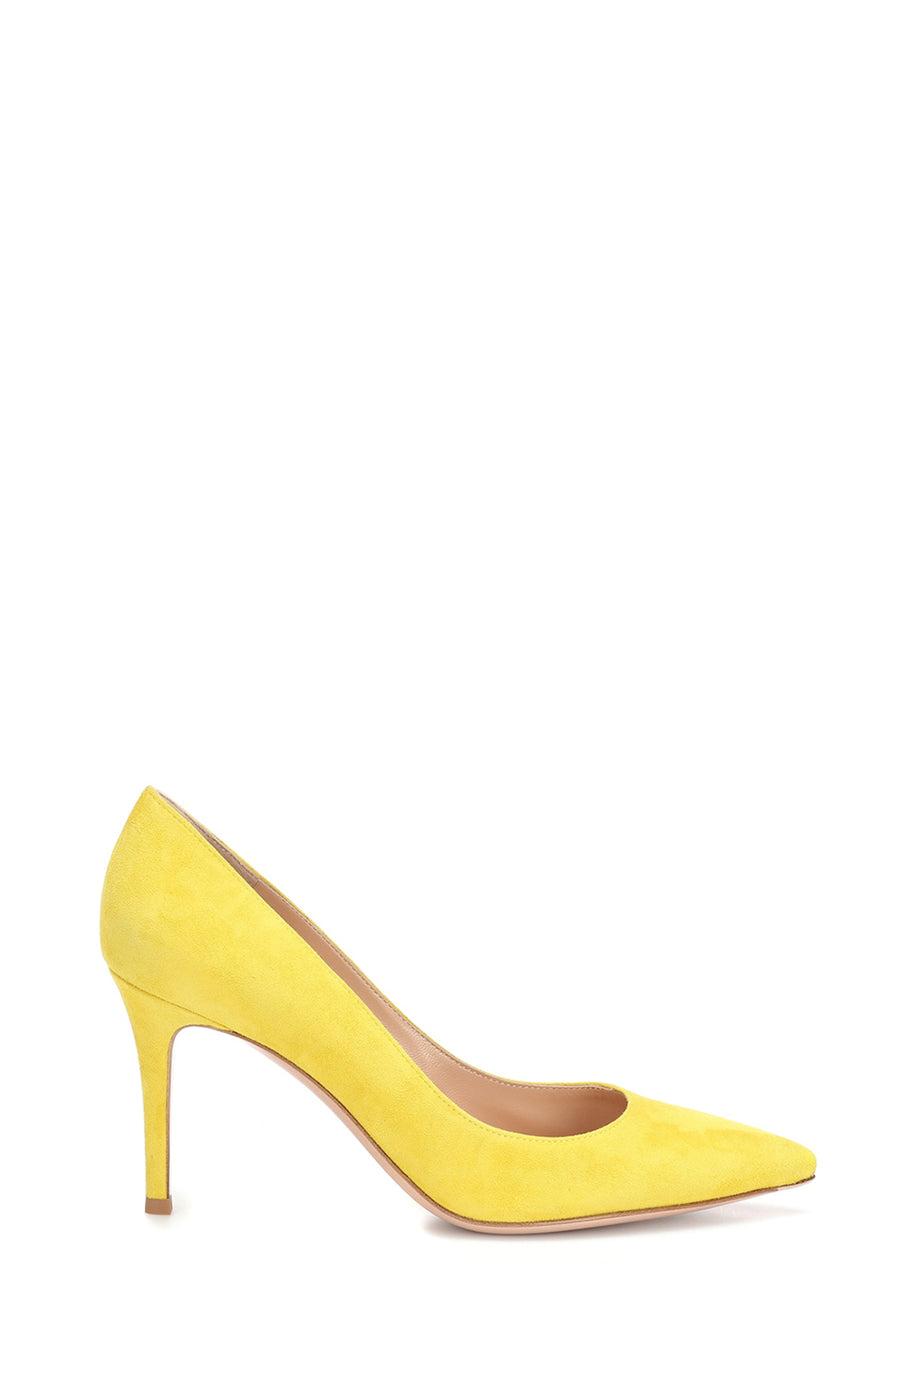 It doesn't get any more classic than these. The iconic 'Gianvito' pump is a signature style. Finished here in a fresh, butter yellow suede and an easy to wear mid-heel. 